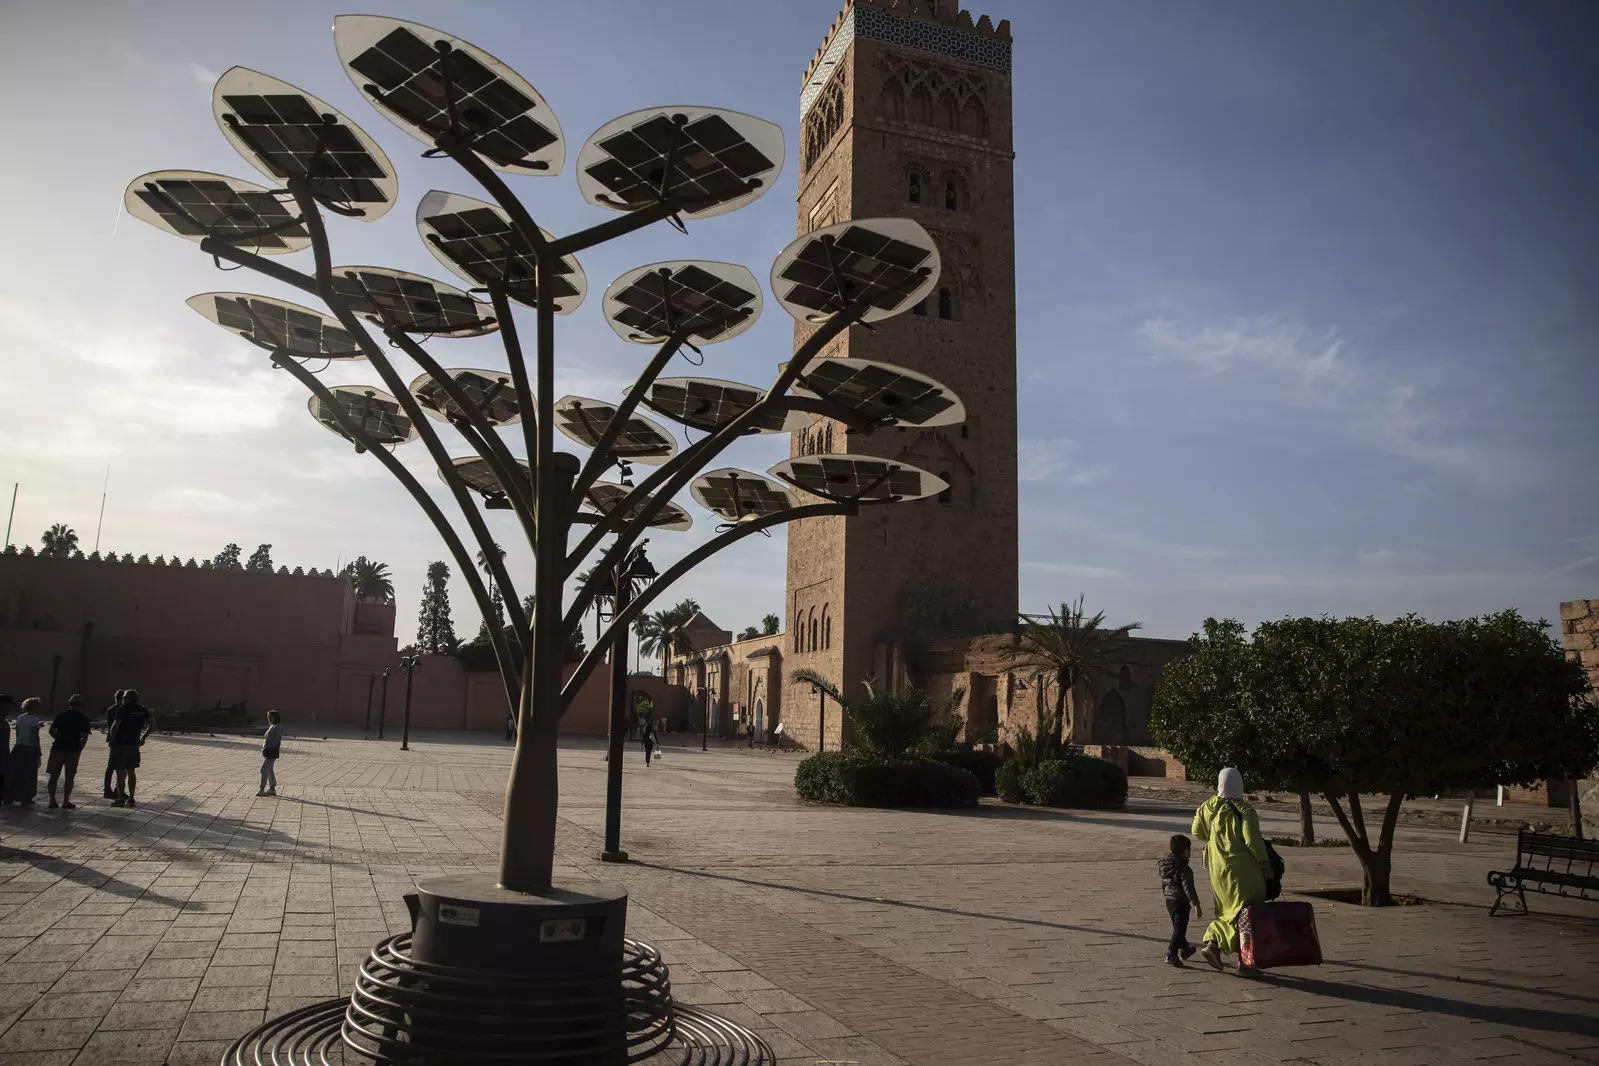  FILE - People walk past a solar tree that generates energy using panels, in front of the landmark Kotoubia mosque in Marrakech, Morocco, Nov. 12, 2022. The majority of developing nations are set to miss out on the economic benefits of booming green technologies, a United Nations report warned Thursday, March 16, 2023. The U.N.’s agency for trade and development, or UNCTAD, said that unless the international community and national governments actively tend to green tech industries in developing countries, the benefits associated with lower-emission technologies will be near inaccessible for many poorer nations, including many in Africa. (AP Photo/Mosa’ab Elshamy, File)